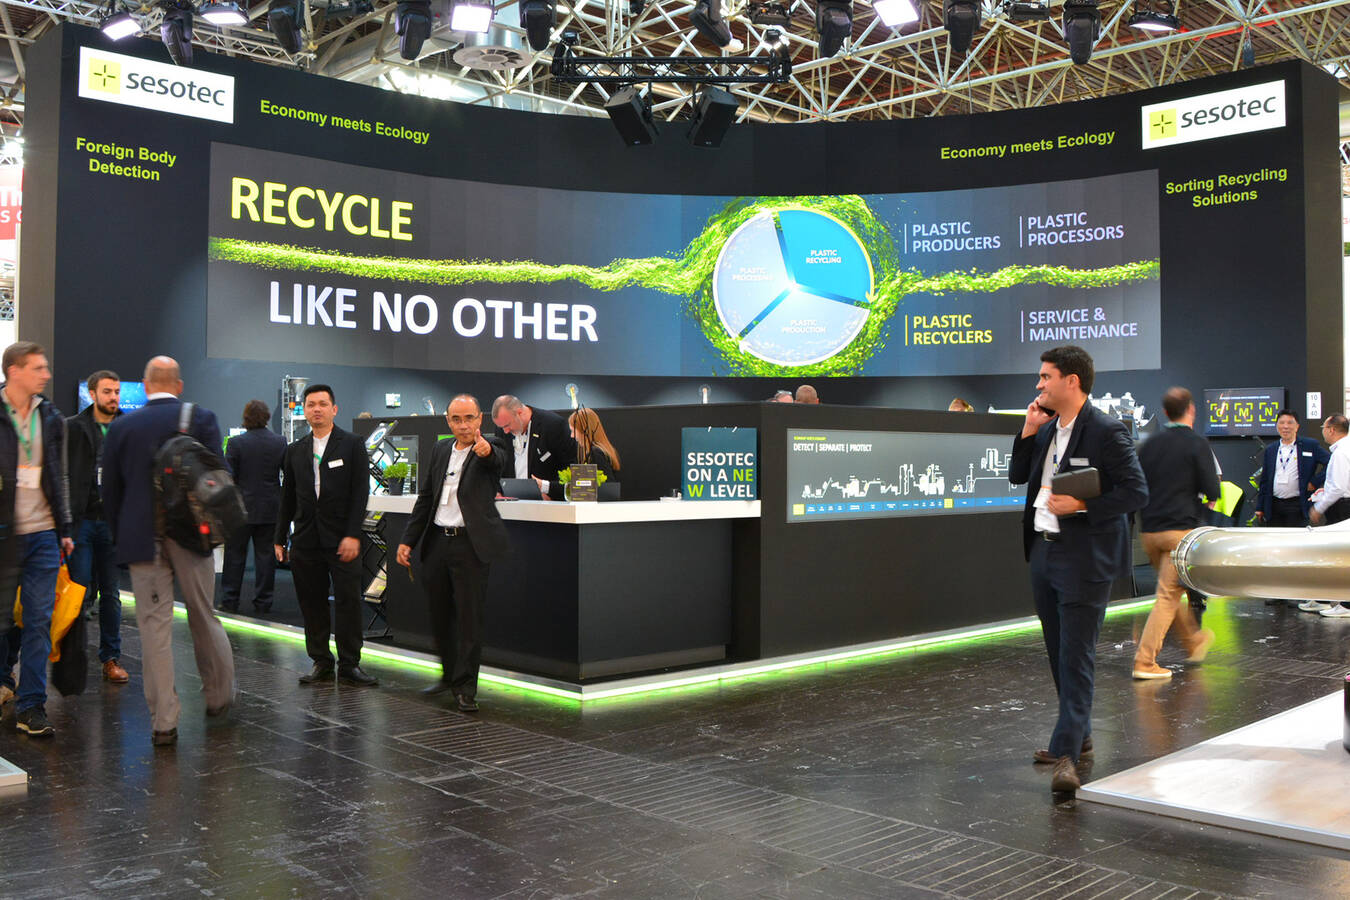 At its new, extraordinary trade fair booth, Sesotec showed how intelligent technologies and services help manufacturers, processors and recyclers of plastics to produce in a cycle-oriented and at the same time highly efficient manner. In this way, economi